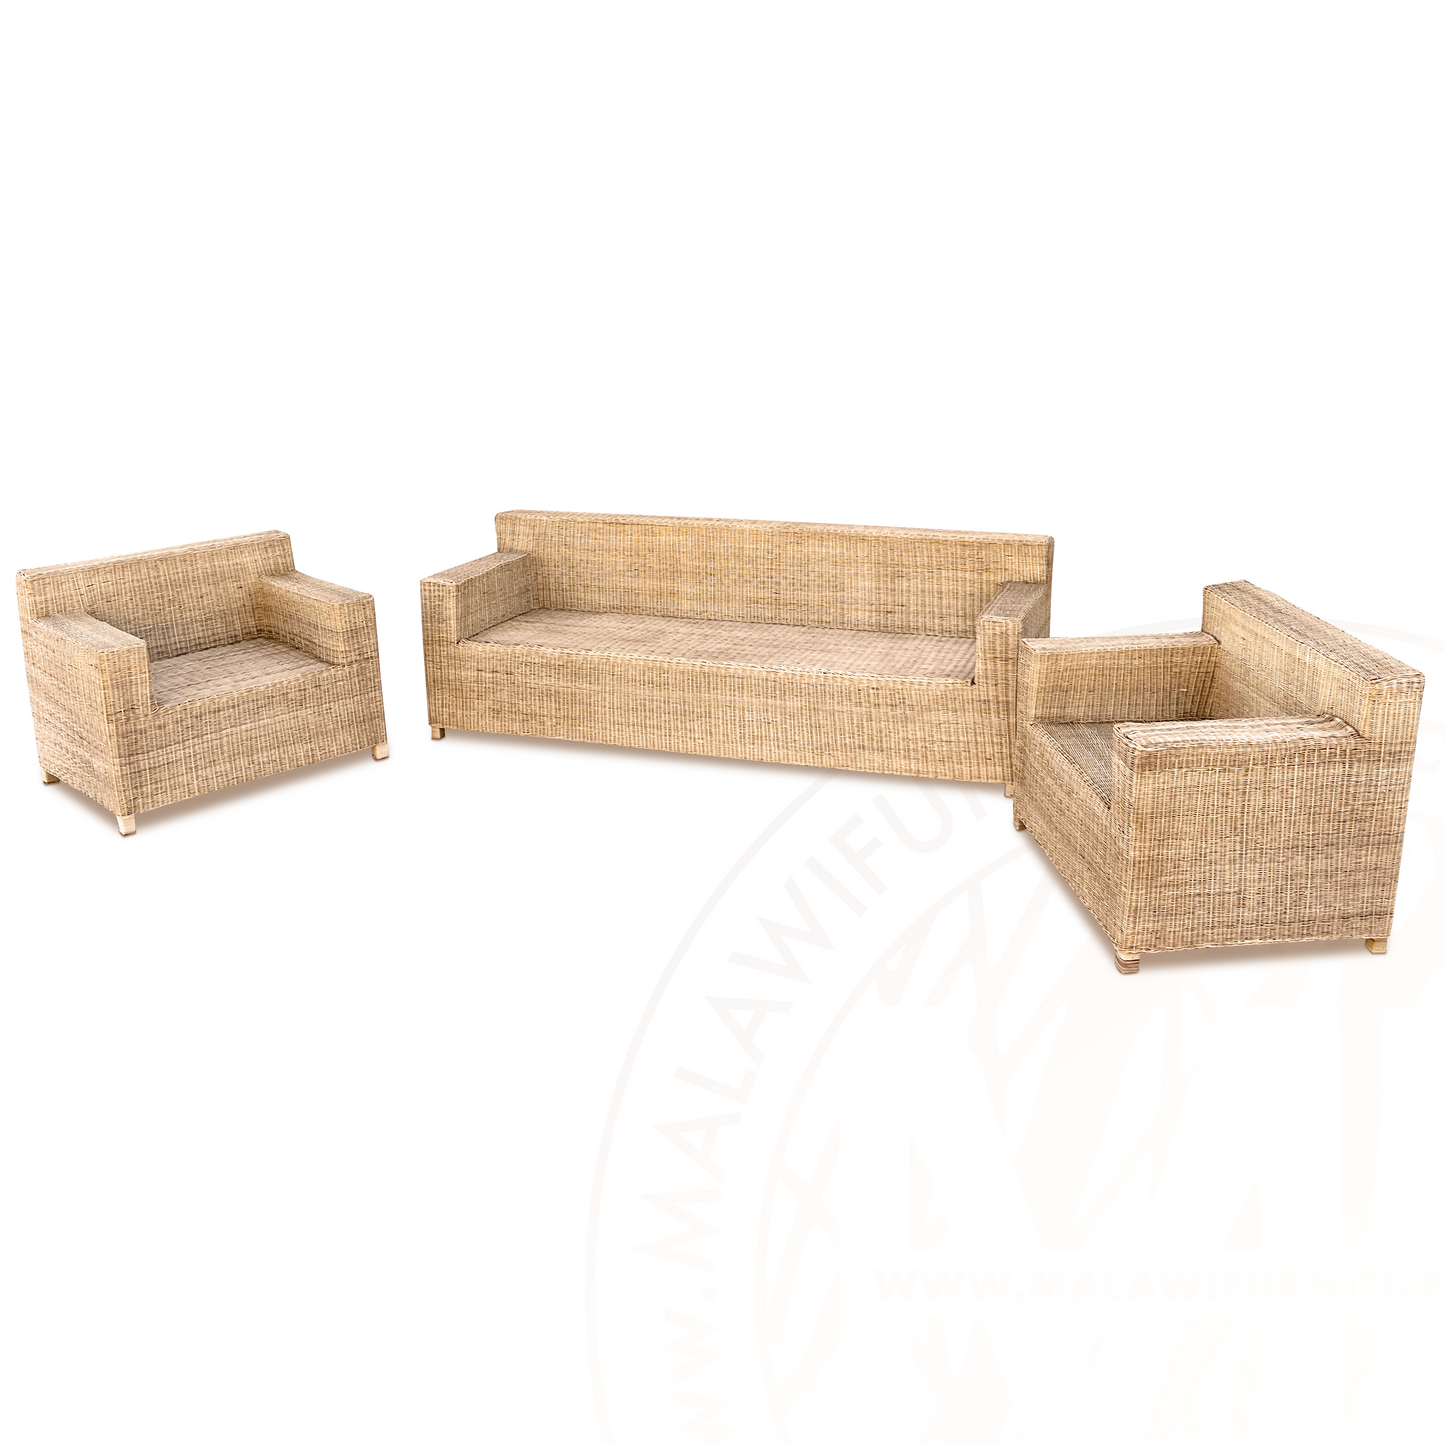 BOX Malawi Couch Set (Option 1) hand weaved woven rattan cane chair malawi with cushion